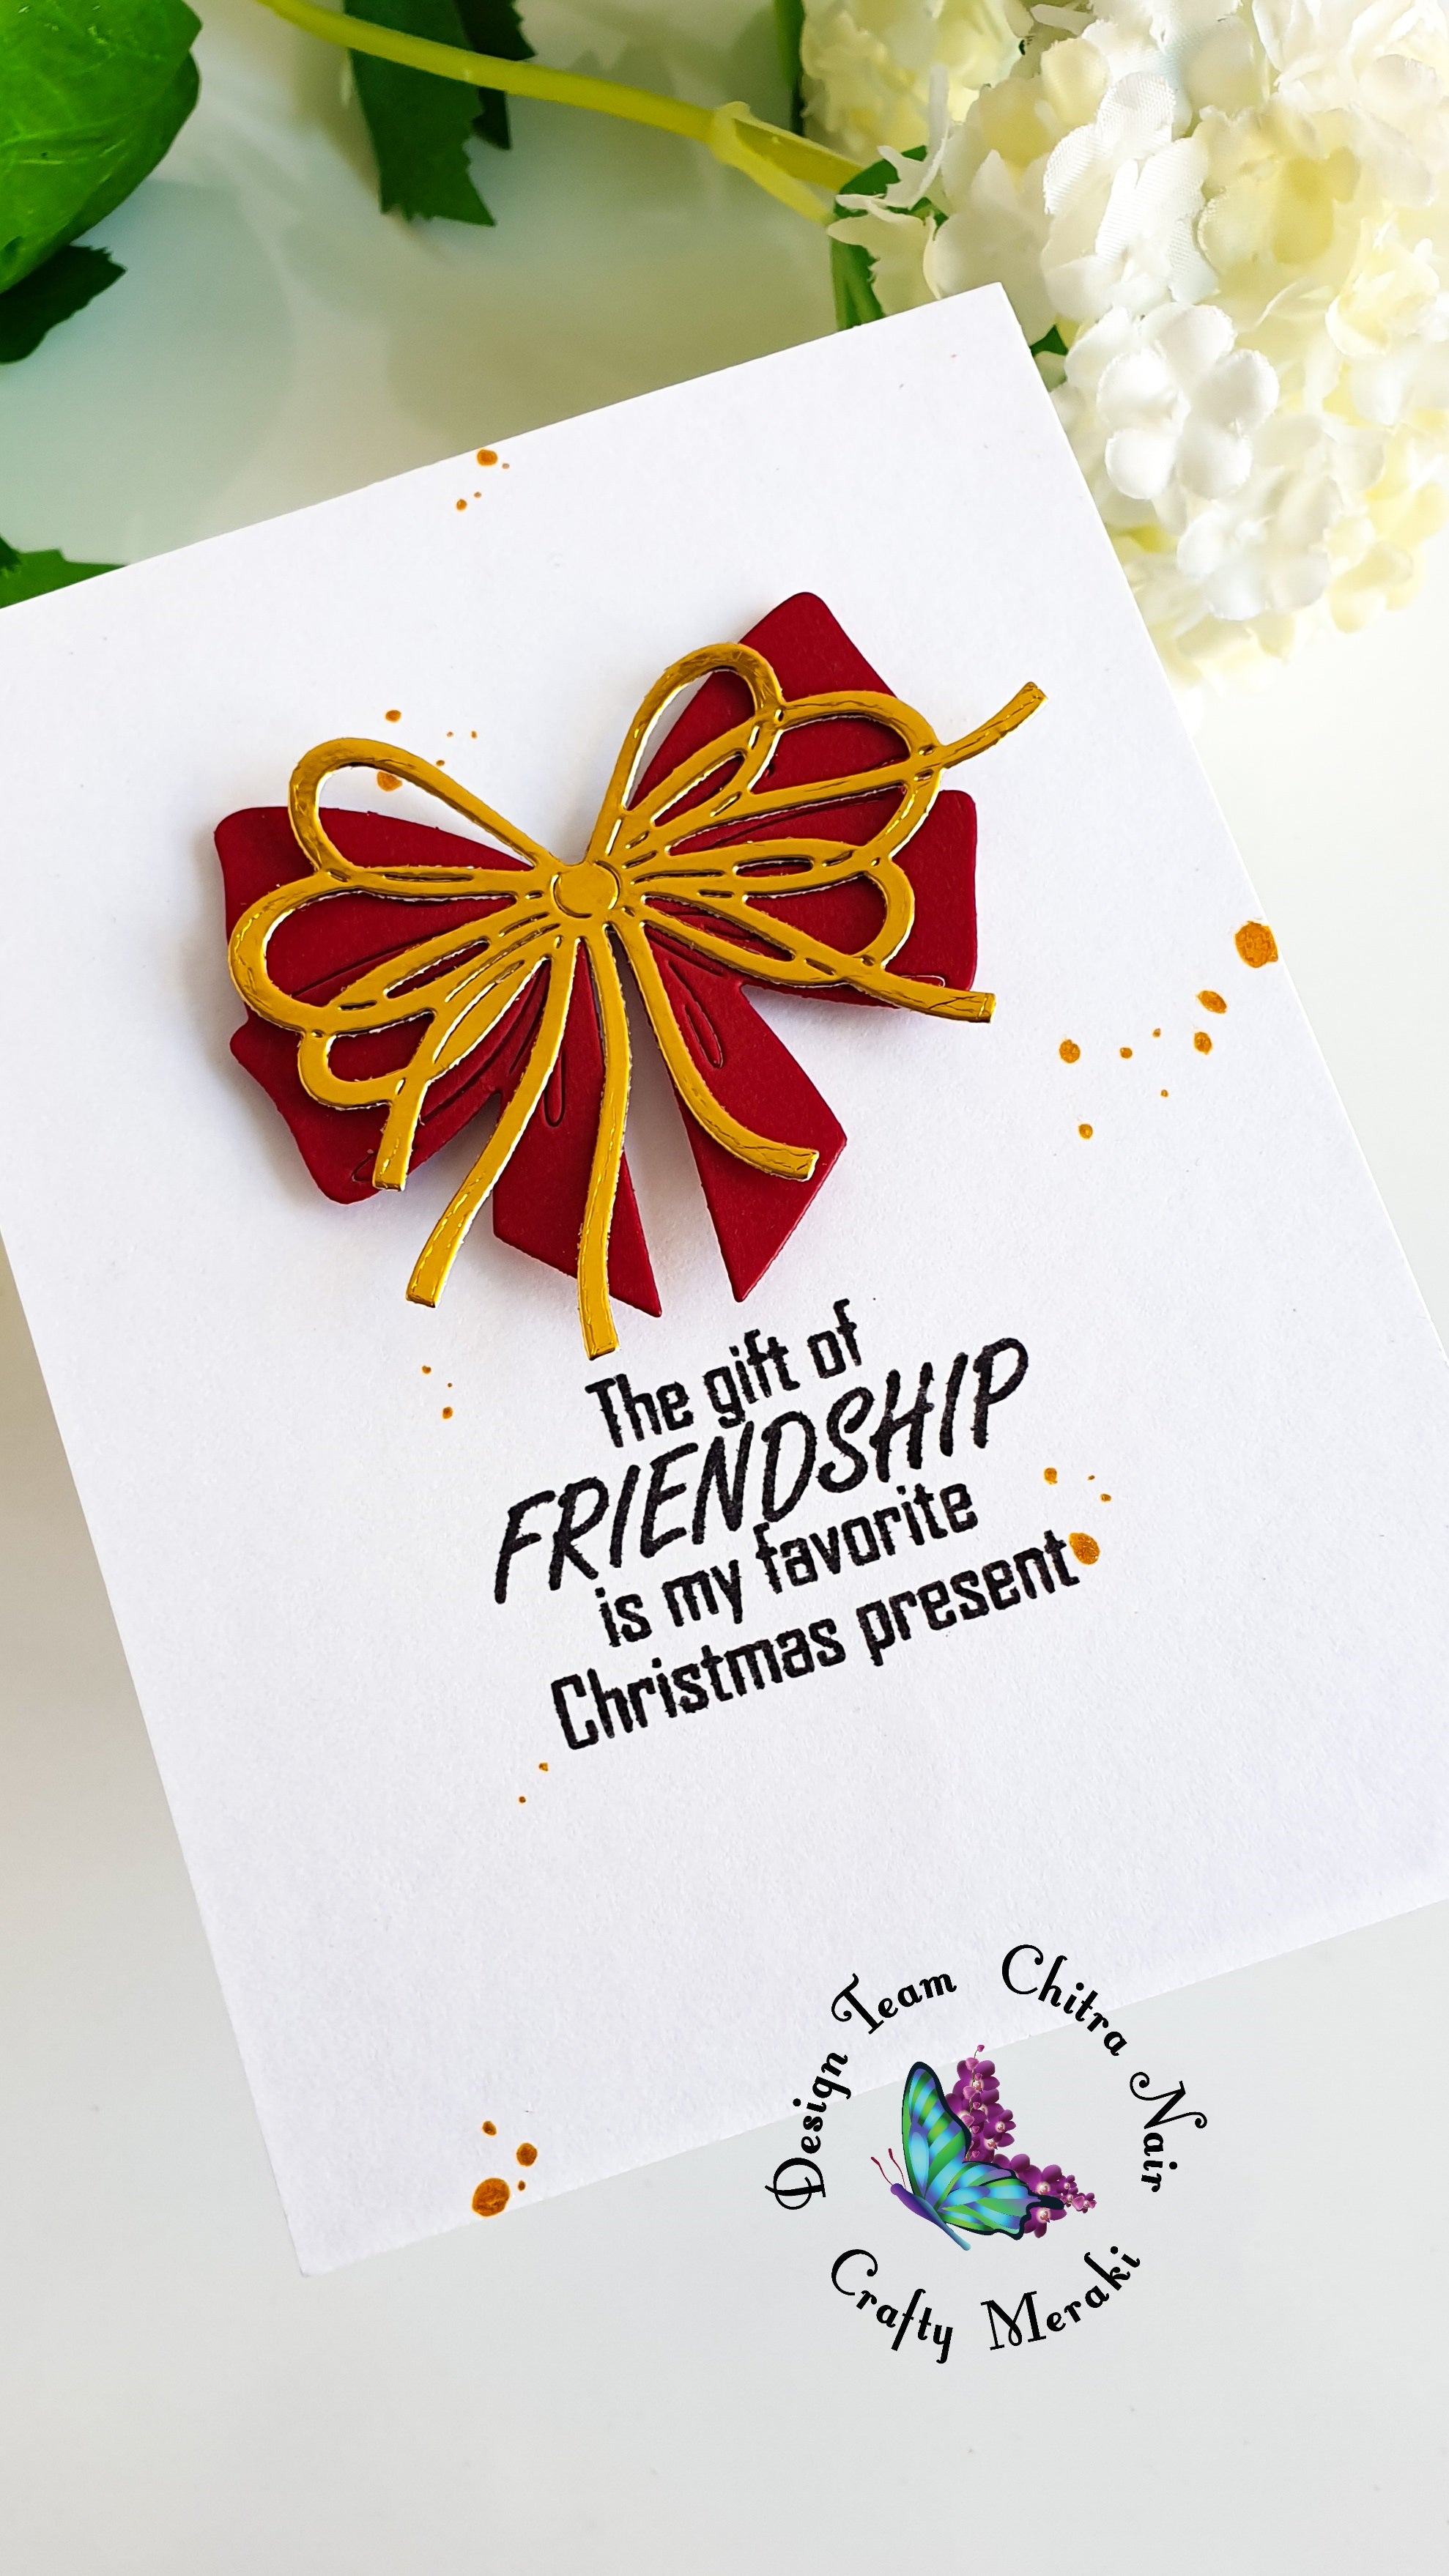 The gift of friendship by Chitra